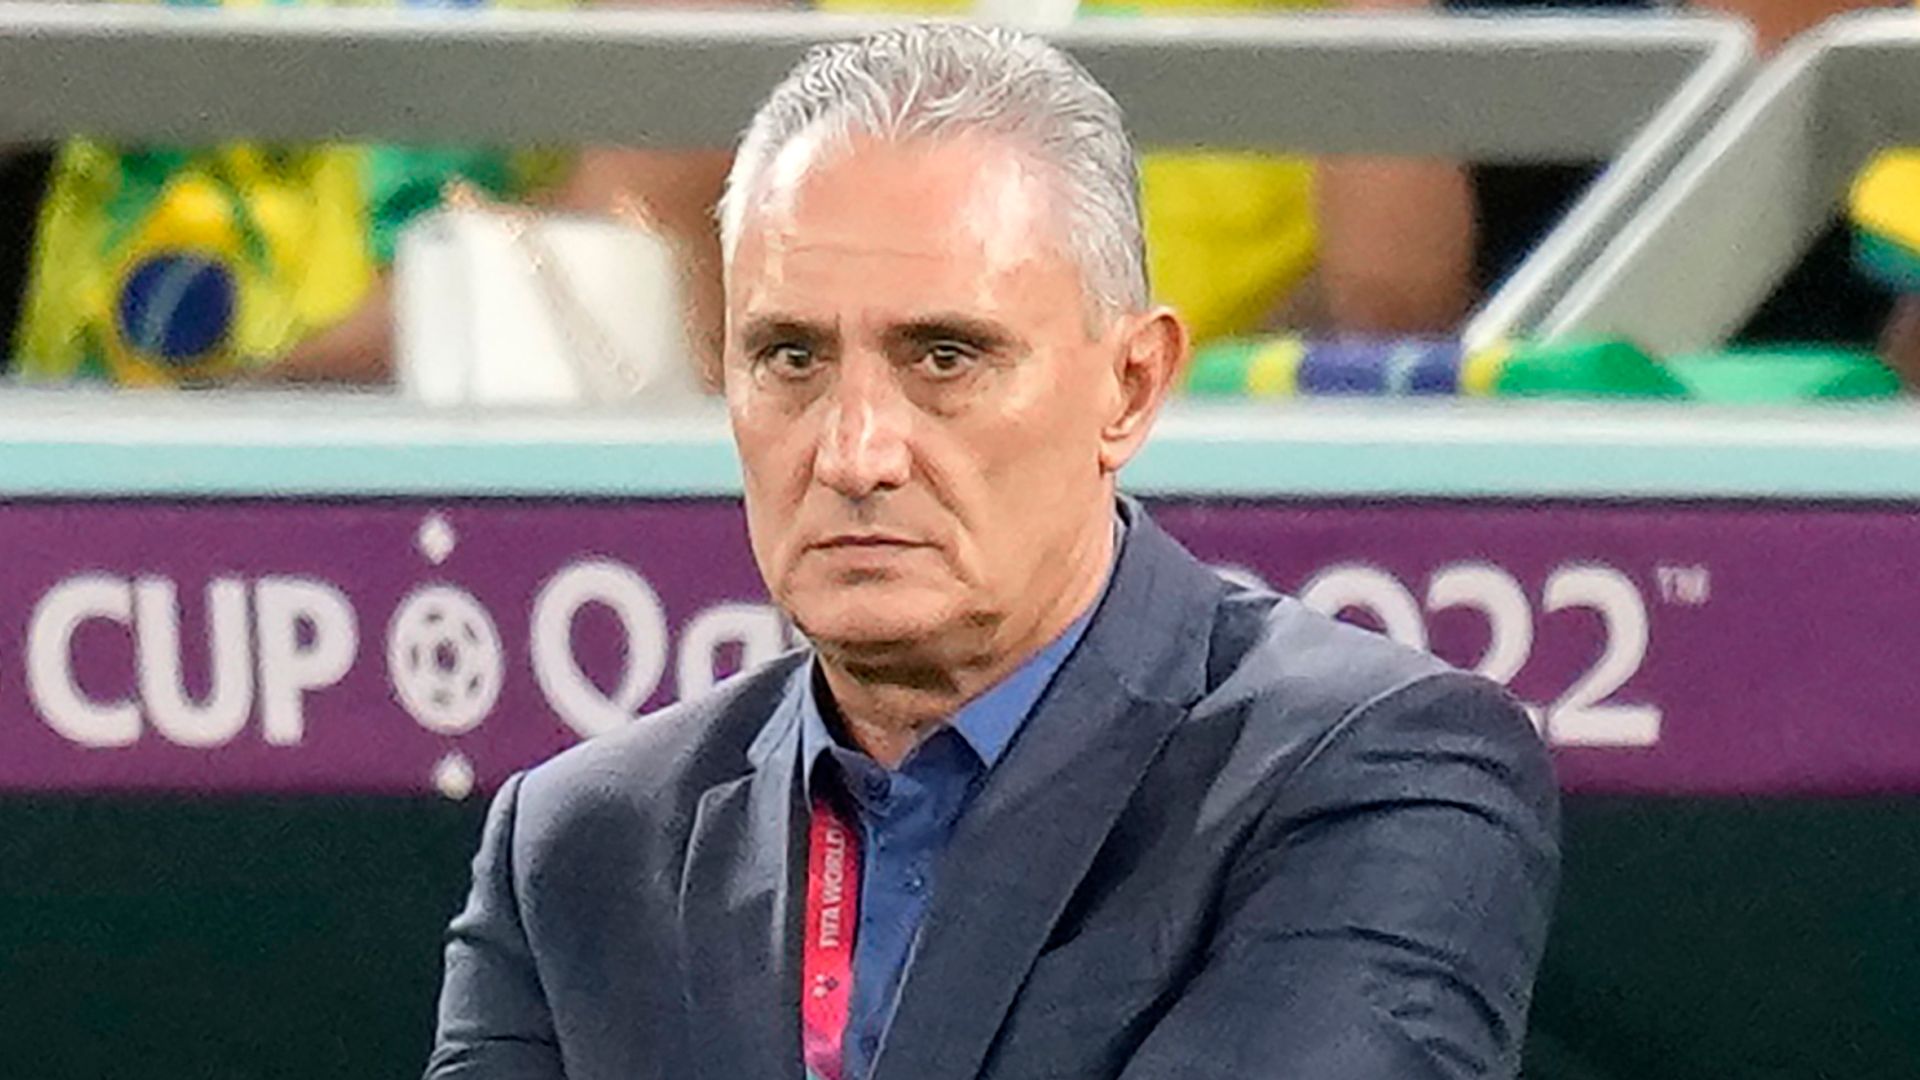 Brazil head coach Tite leaves after World Cup exit